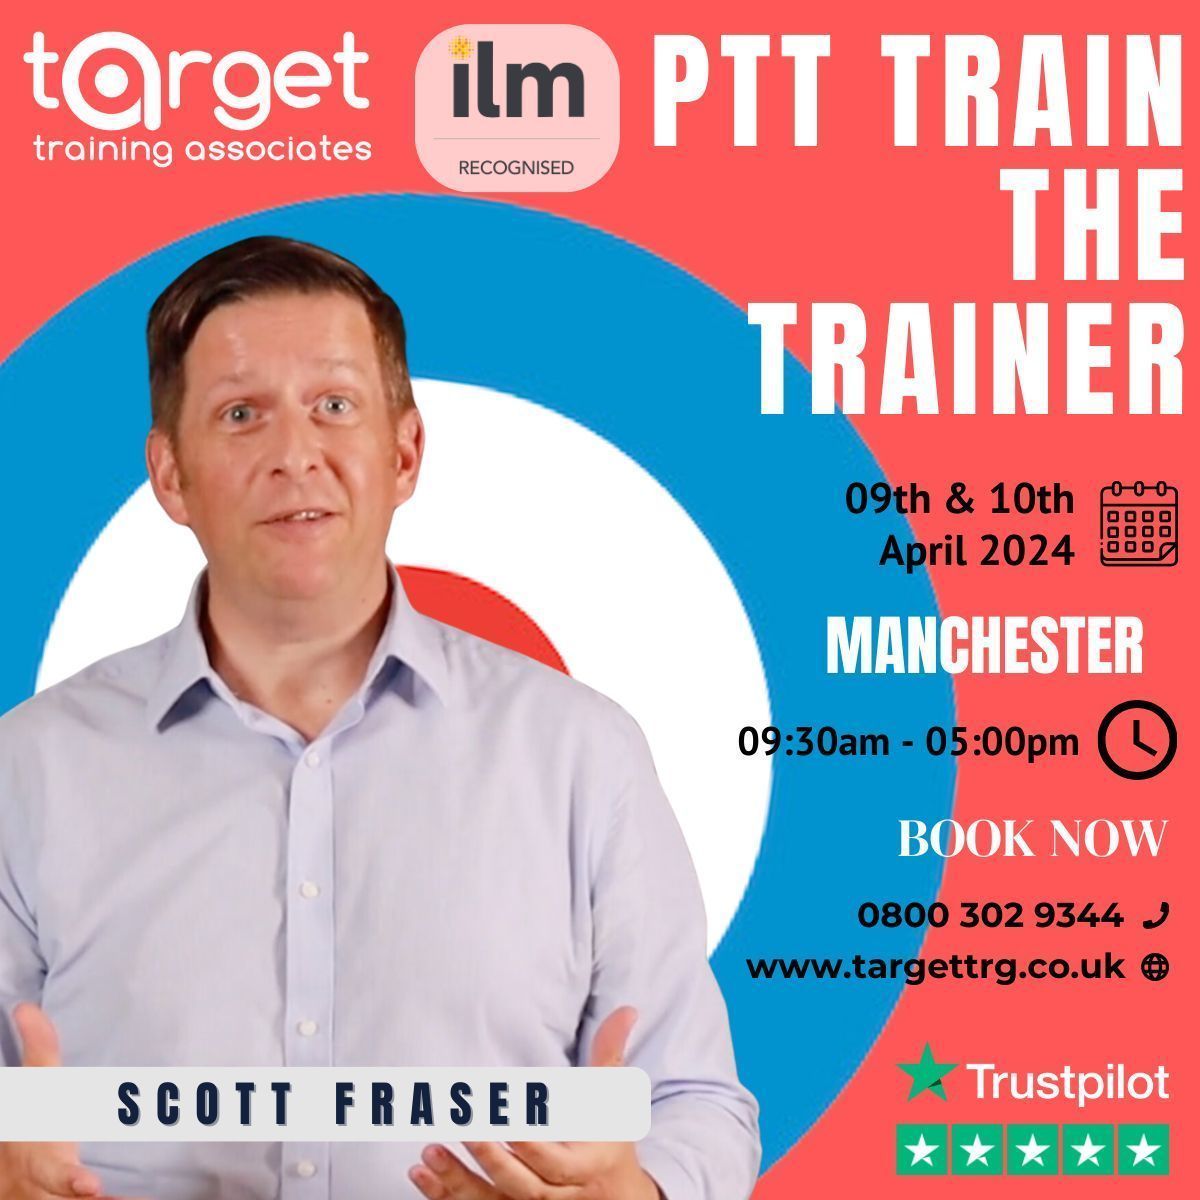 💡 Looking to make a real impact? Our Train the Trainer courses in #Manchester will equip you with the tools and confidence to inspire change. Join us and unlock your full potential! Limited places available, reserve yours now: buff.ly/42GB1GZ 🌟💬 #Training #Courses